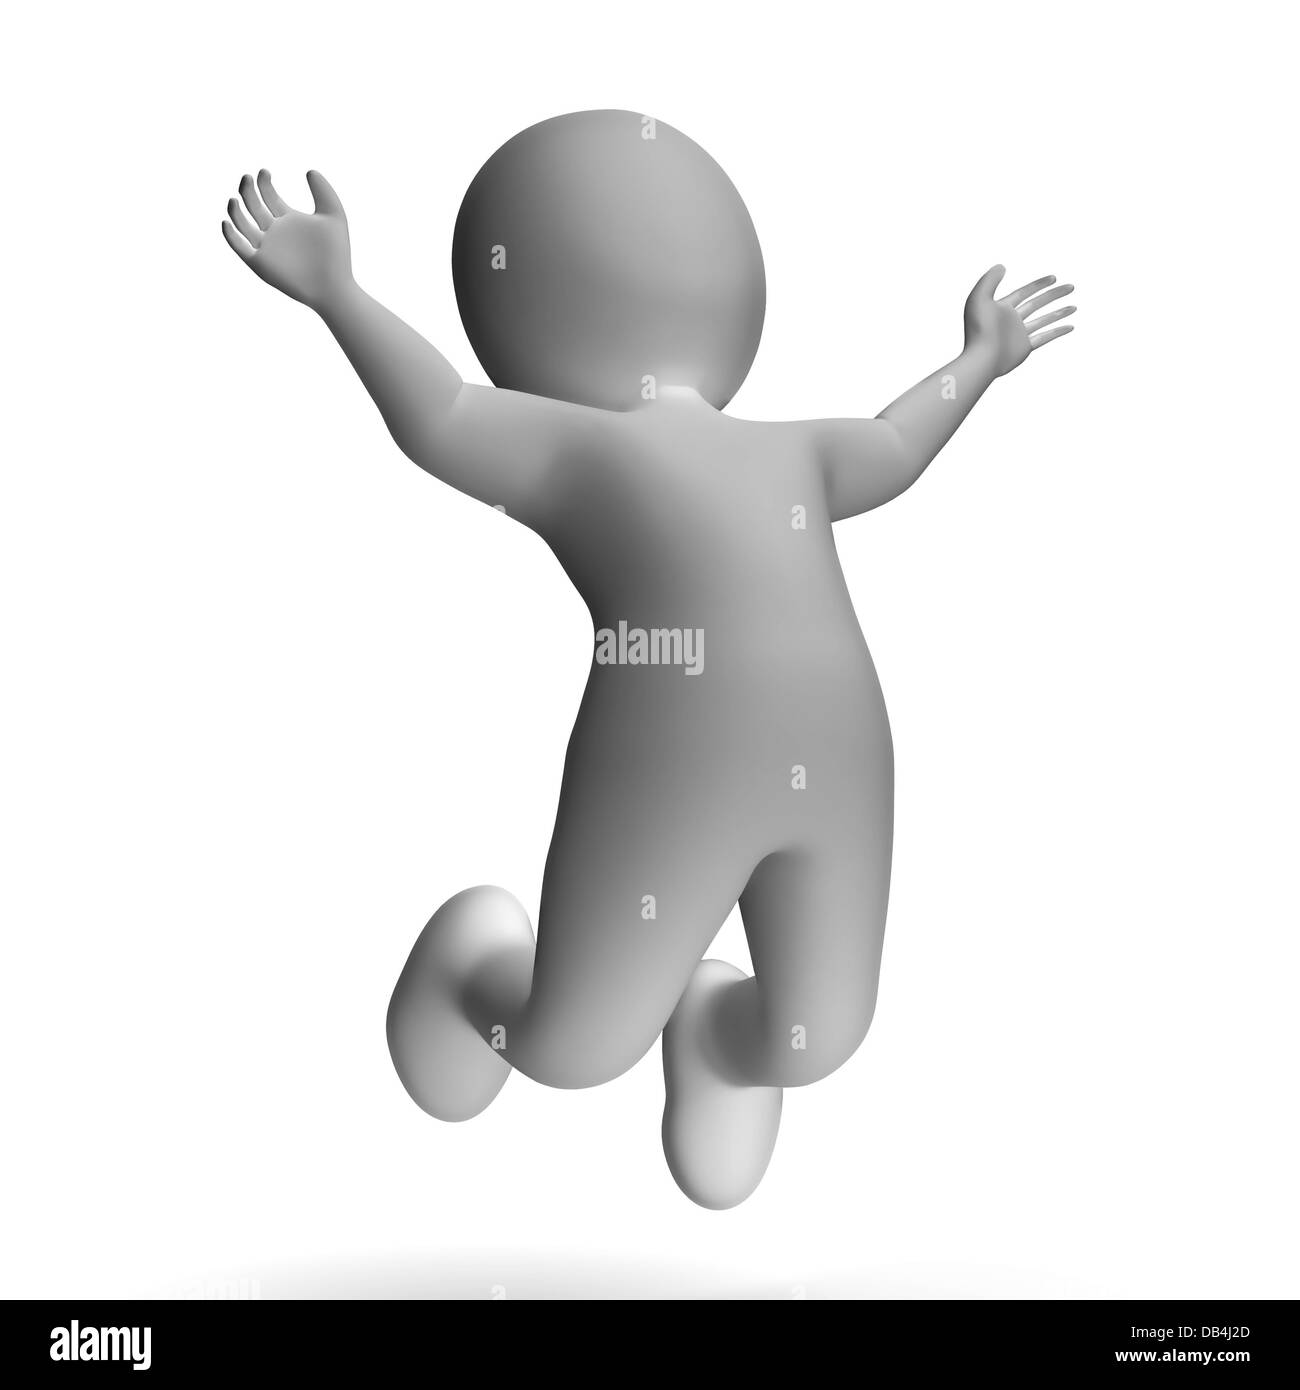 Jumping 3d Character Showing Excitement And Joy Stock Photo